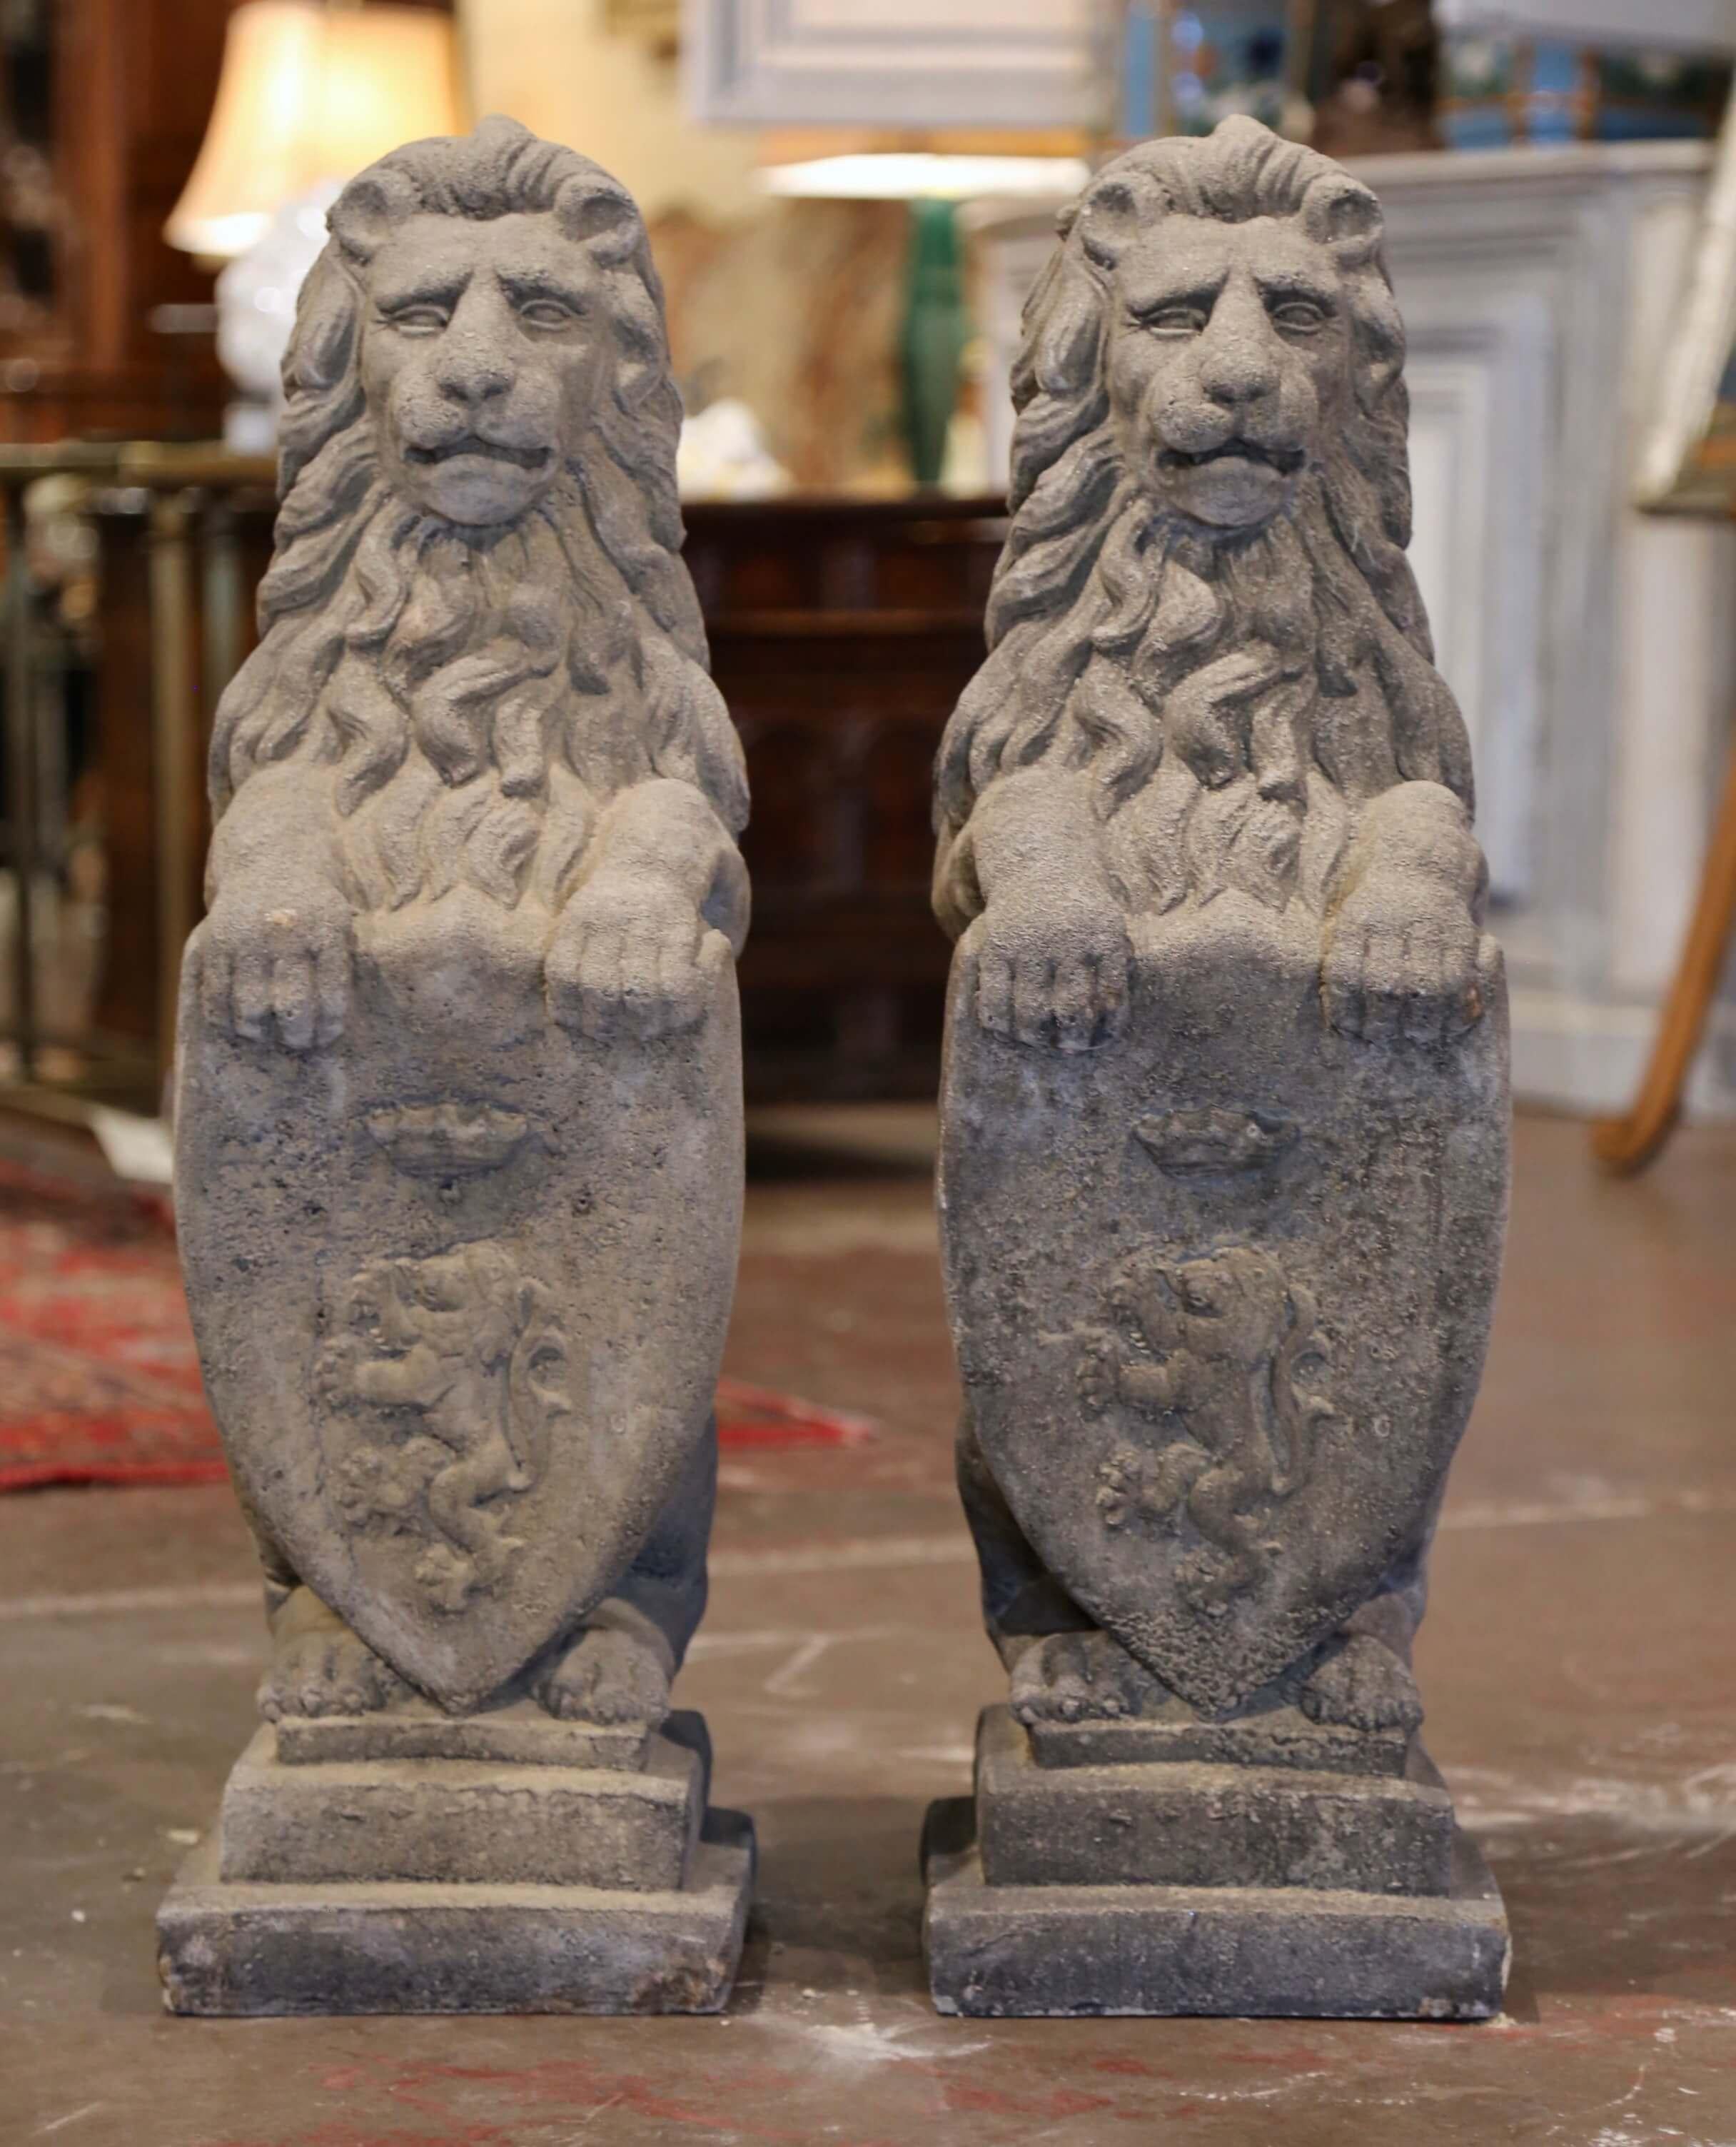 Carved of sandstone and set on integral stepped base, the tall vintage felines are shown sitting on their back legs and holding a heraldic shield with their front paws. The Westcott armorial lions have wonderful expression with long hair and thick